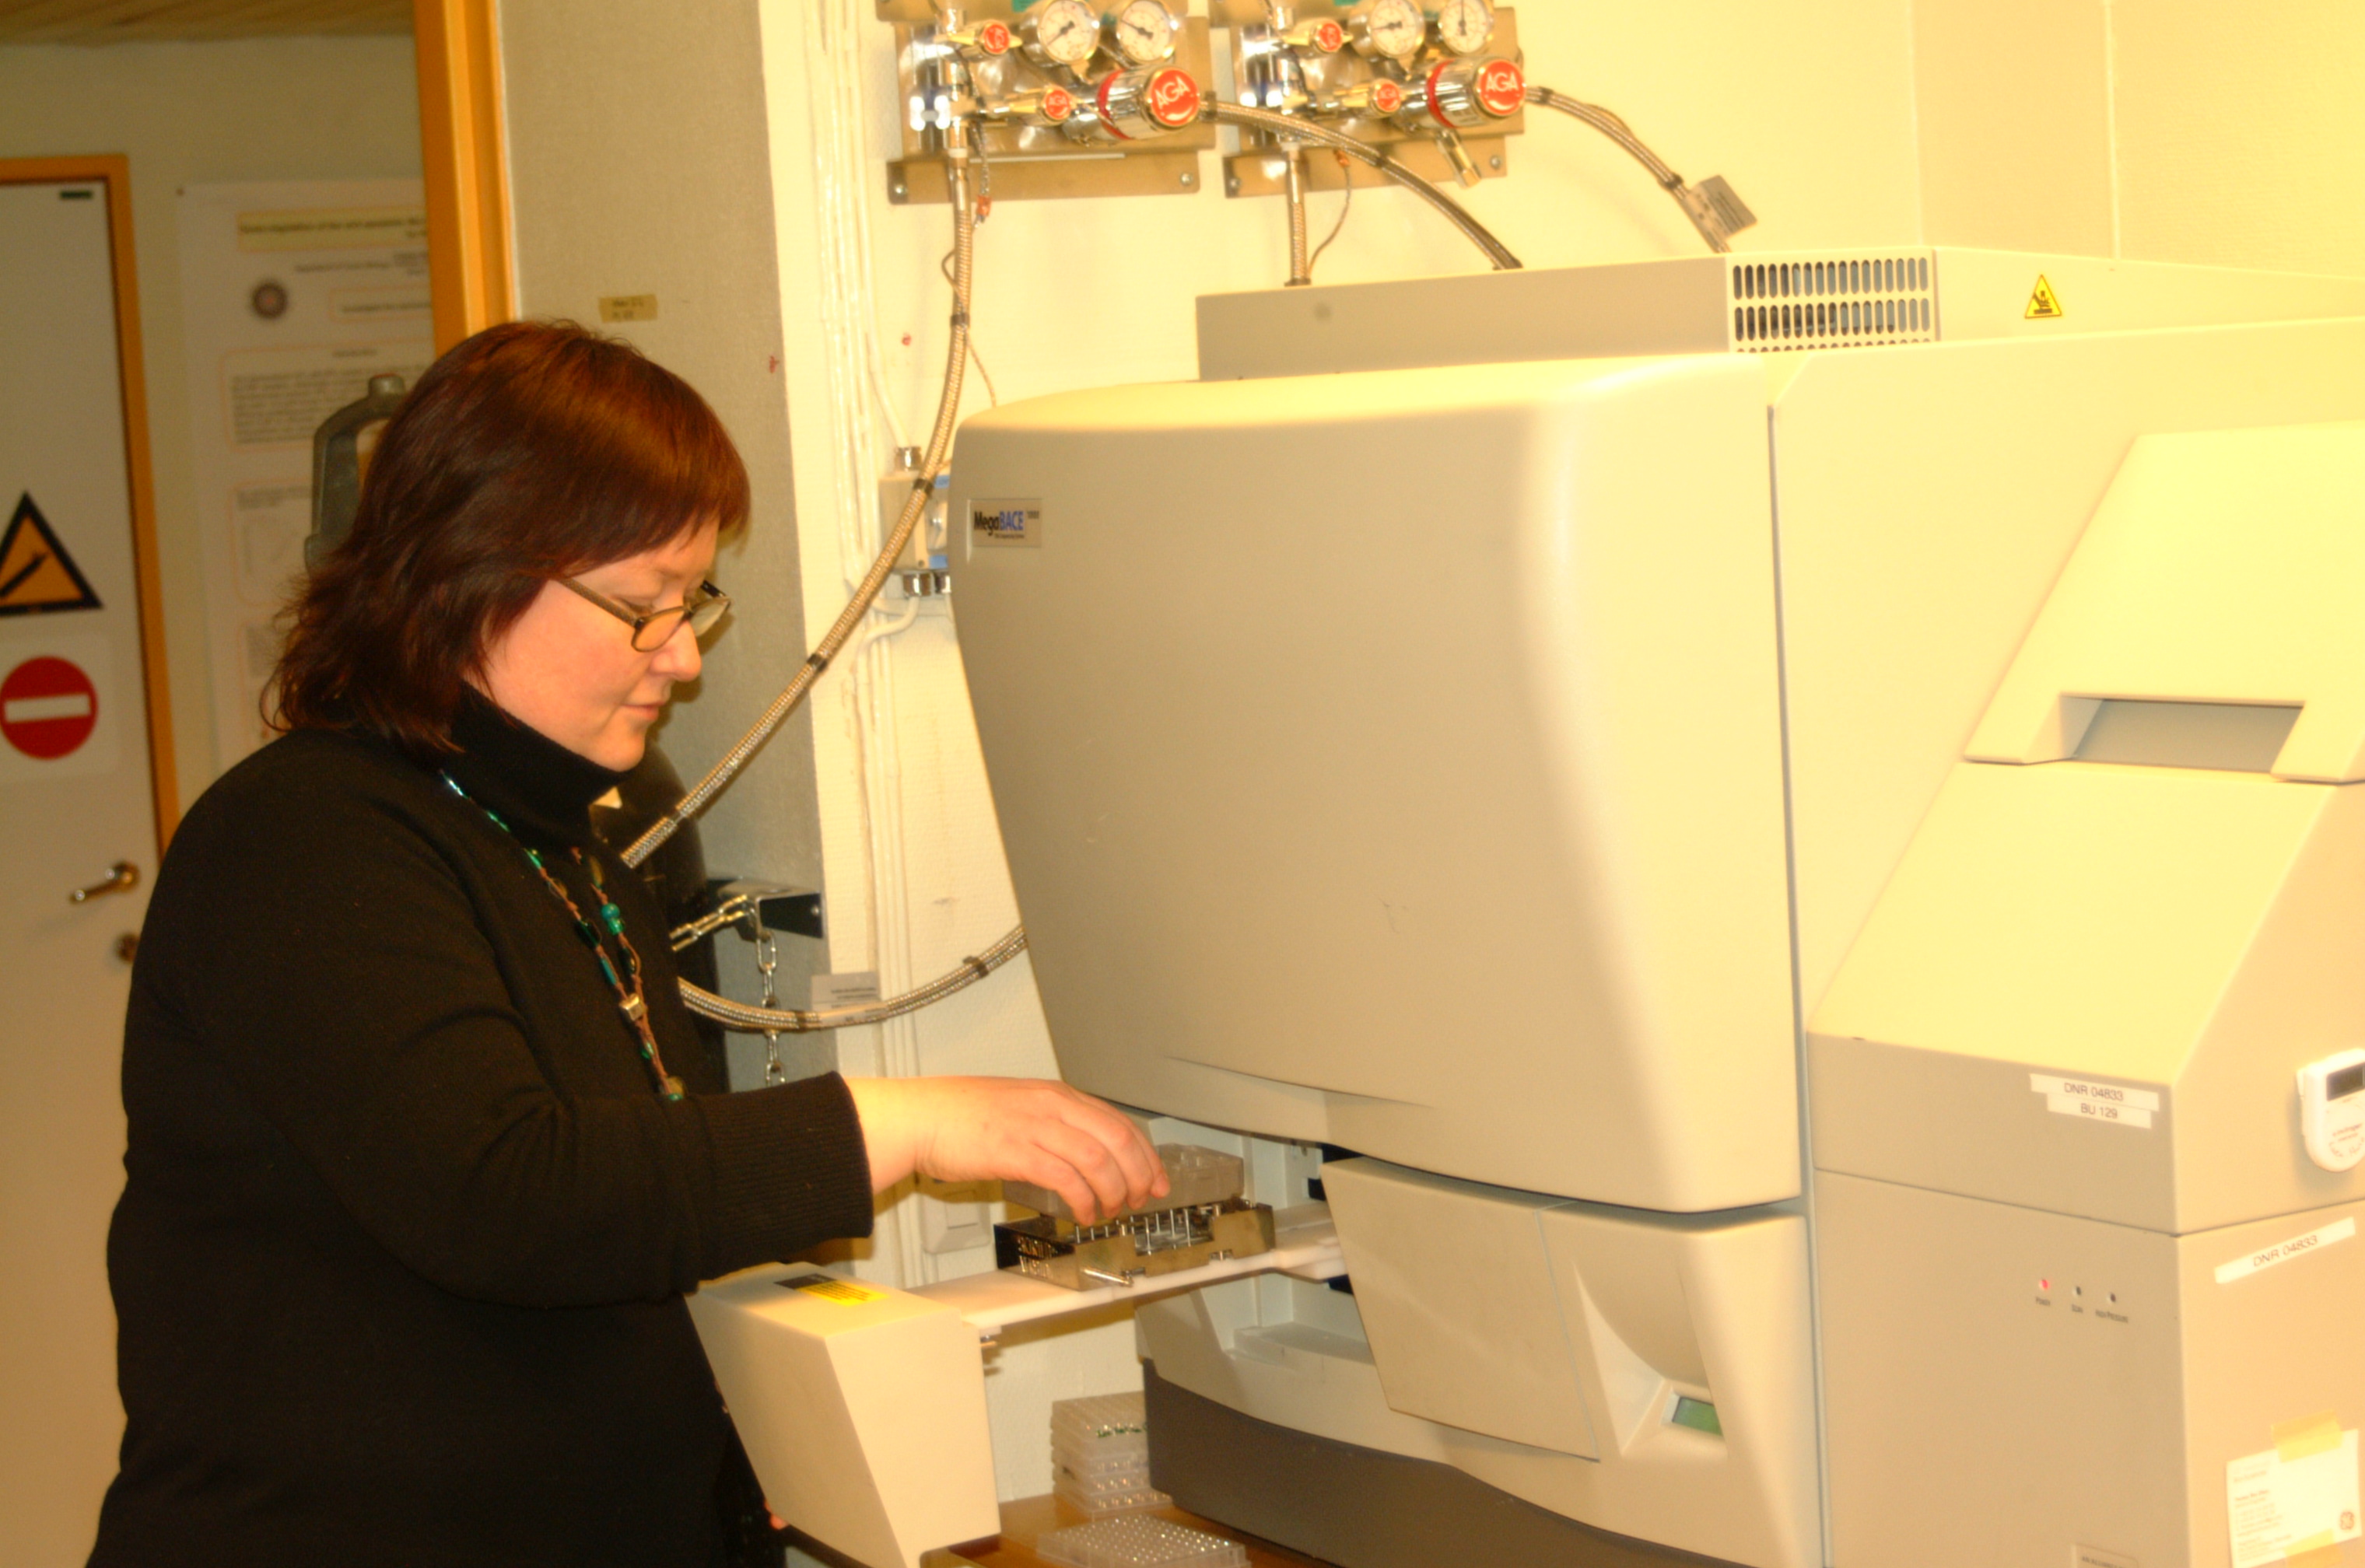 Karen-Marie Heintz in action at the MegBace injecting samples for SNP screening